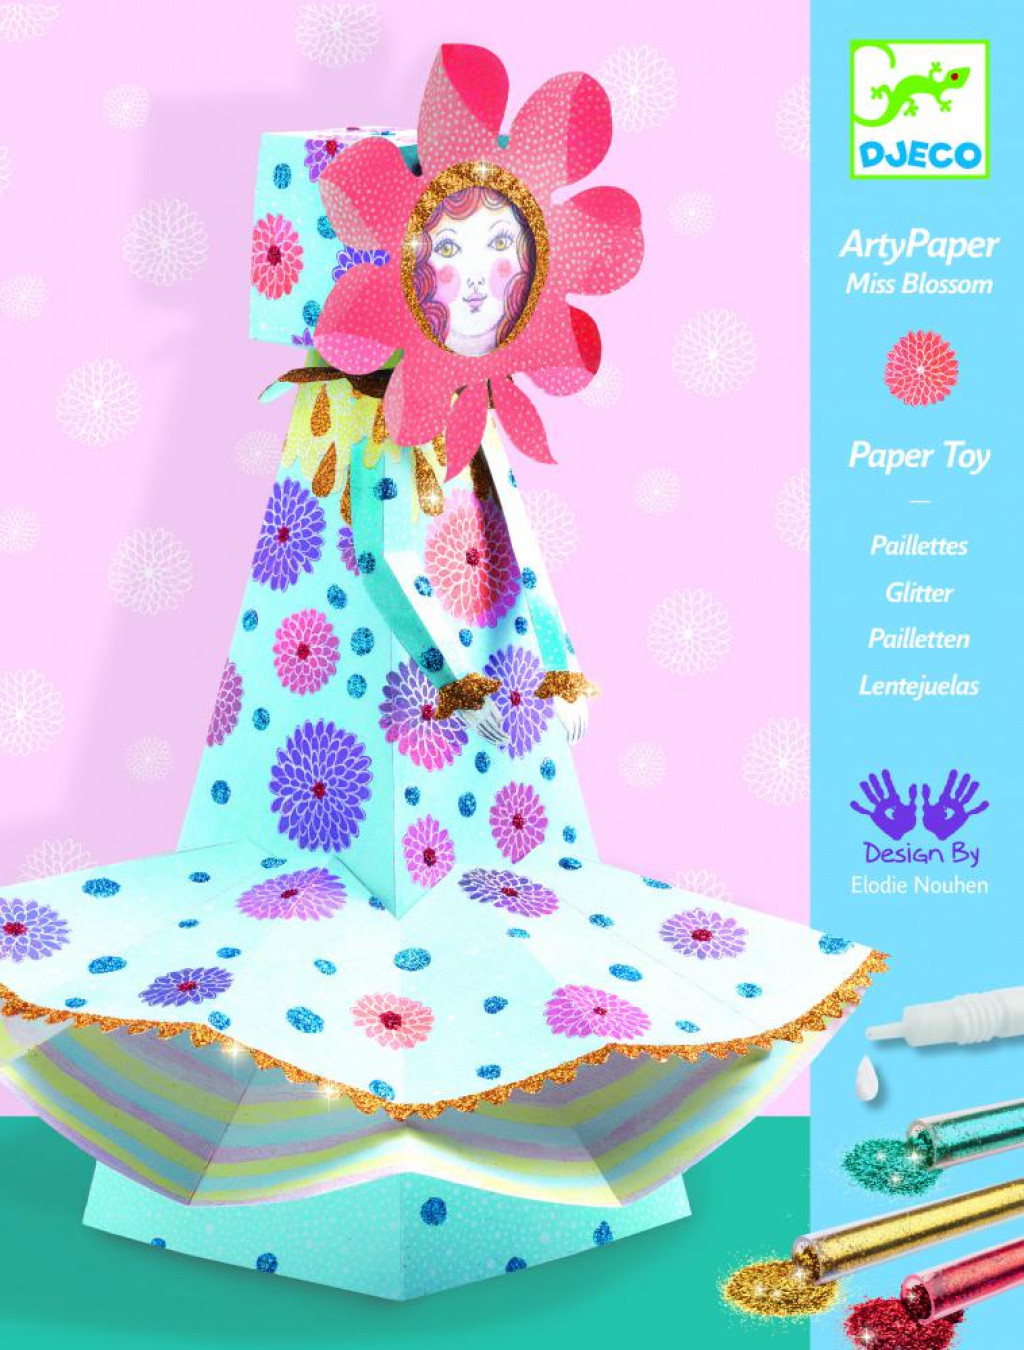 DJECO Arty Paper – miss blossom